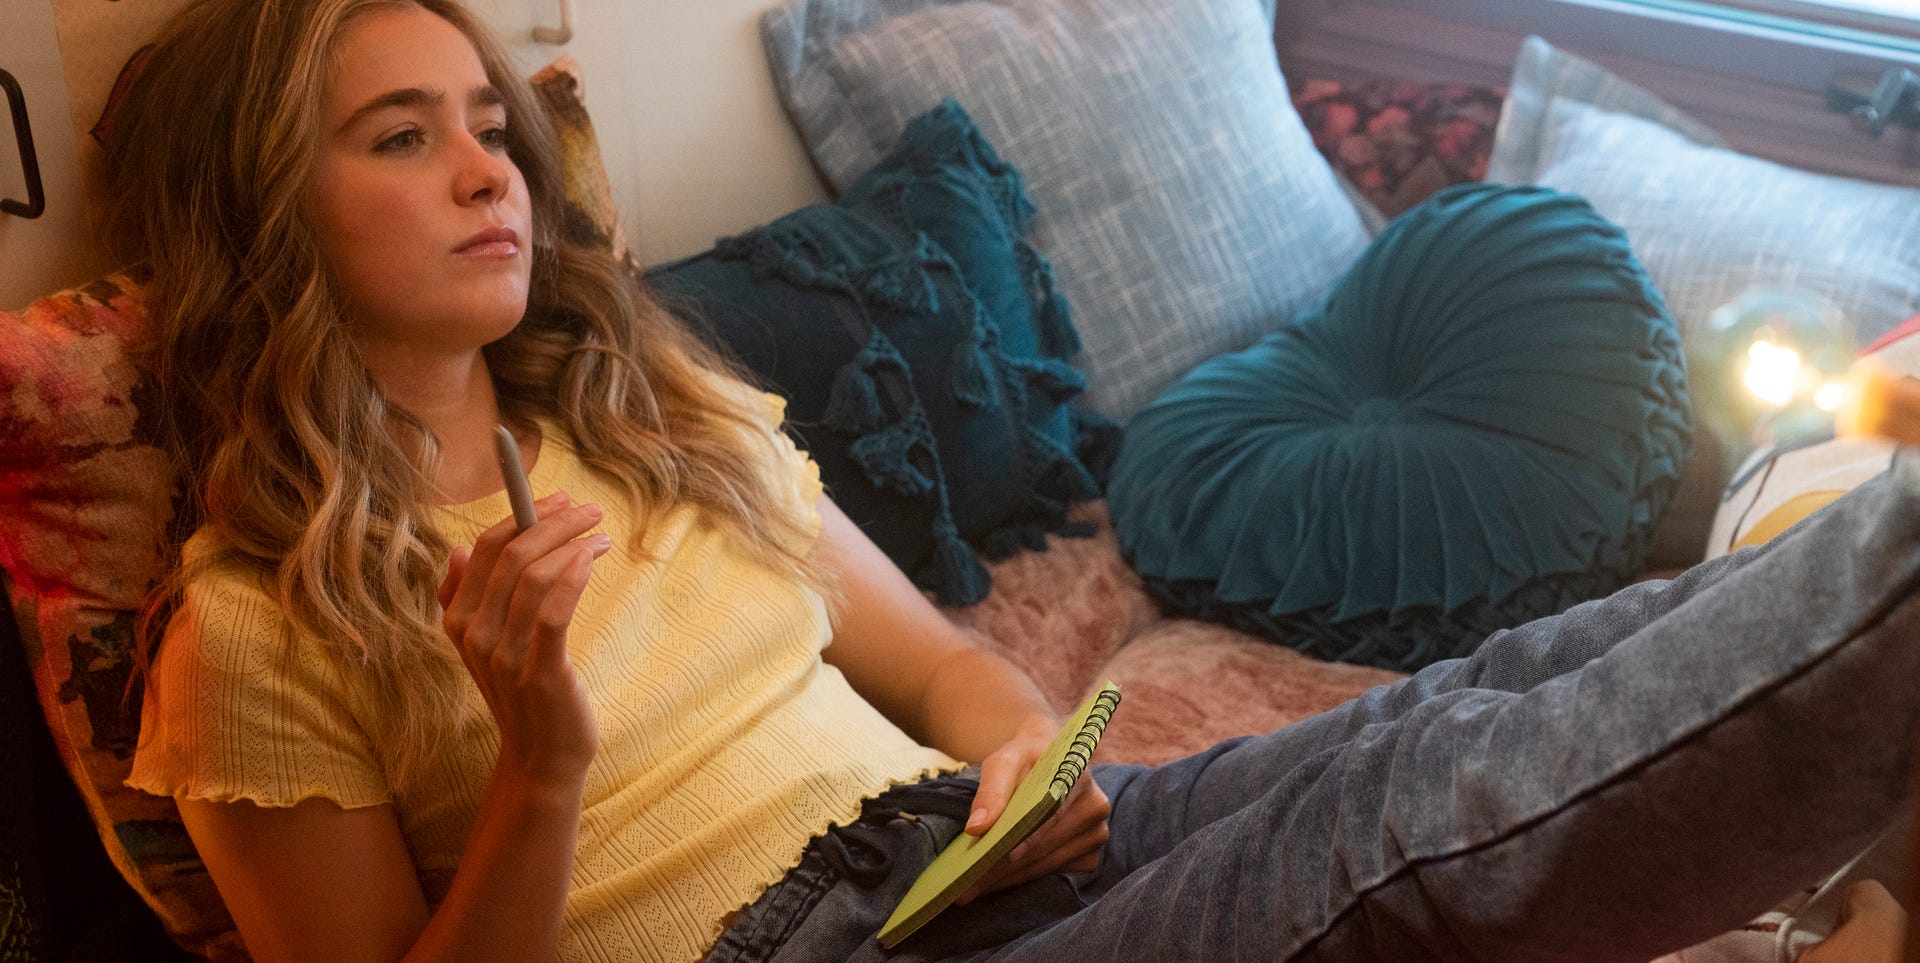 Unpregnant Is an Abortion Comedy for the Booksmart Generation